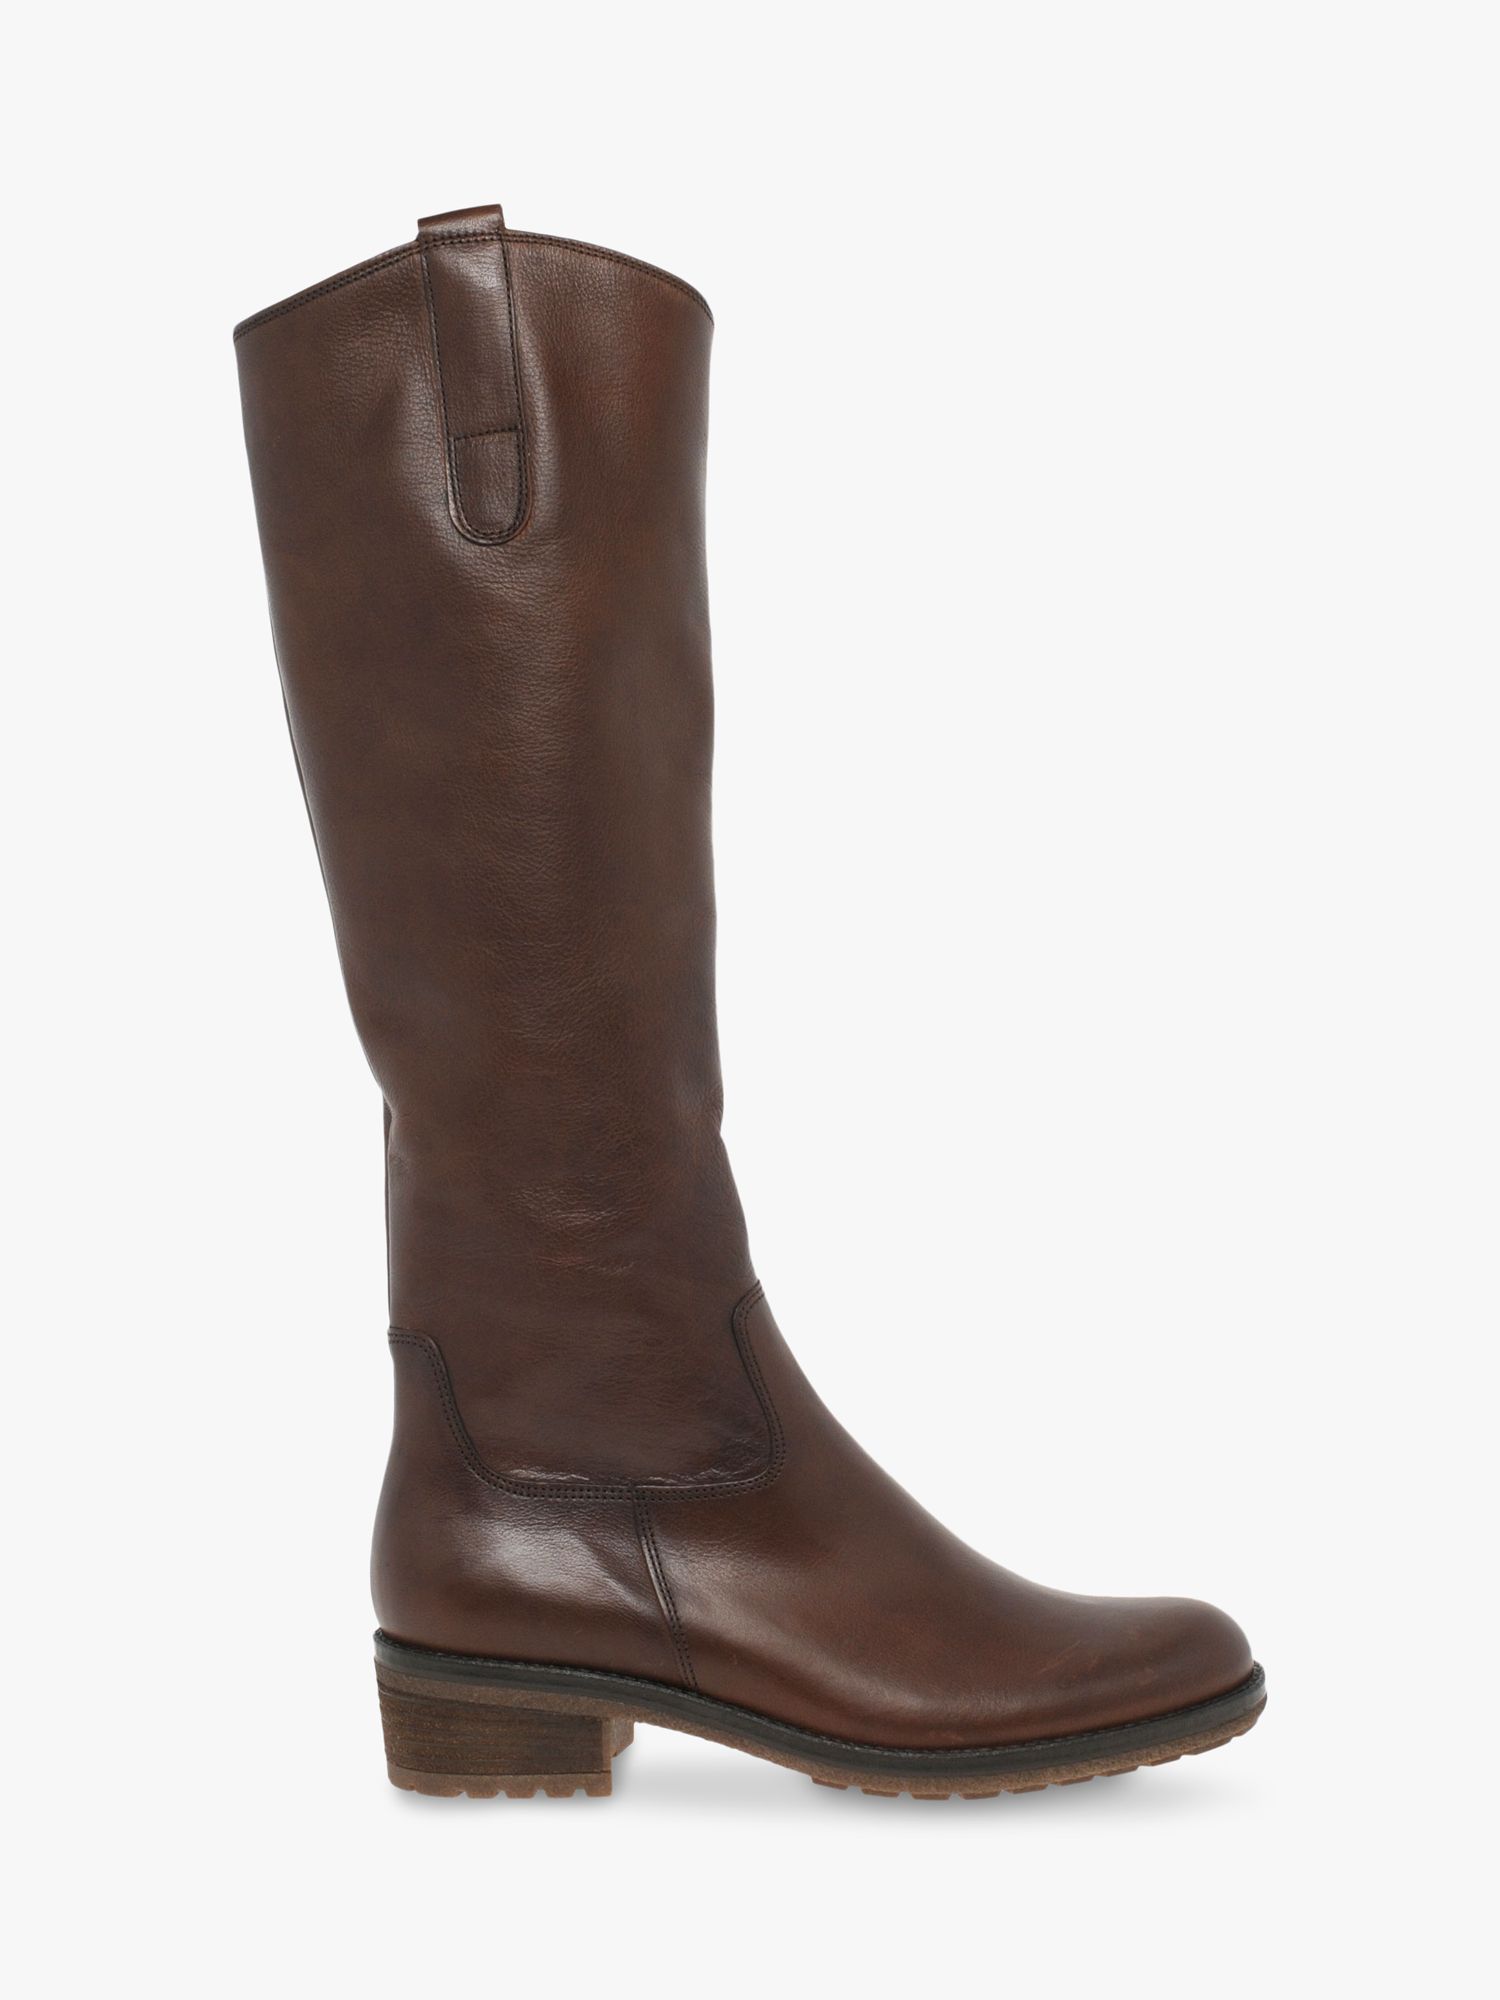 slim fit riding boots